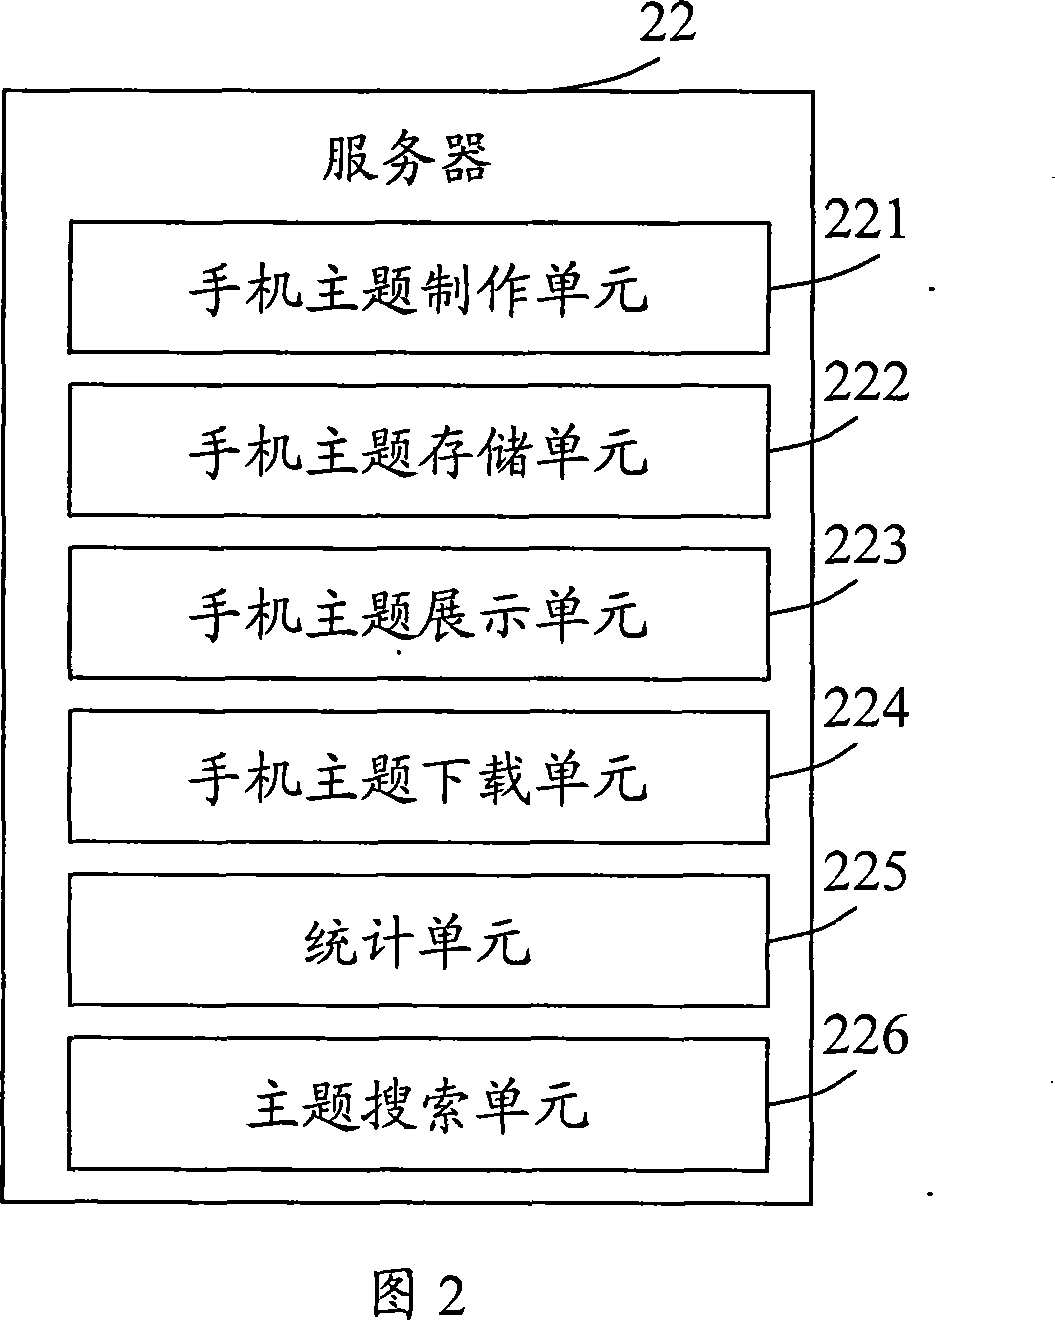 A subject interaction system and method of mobile phone